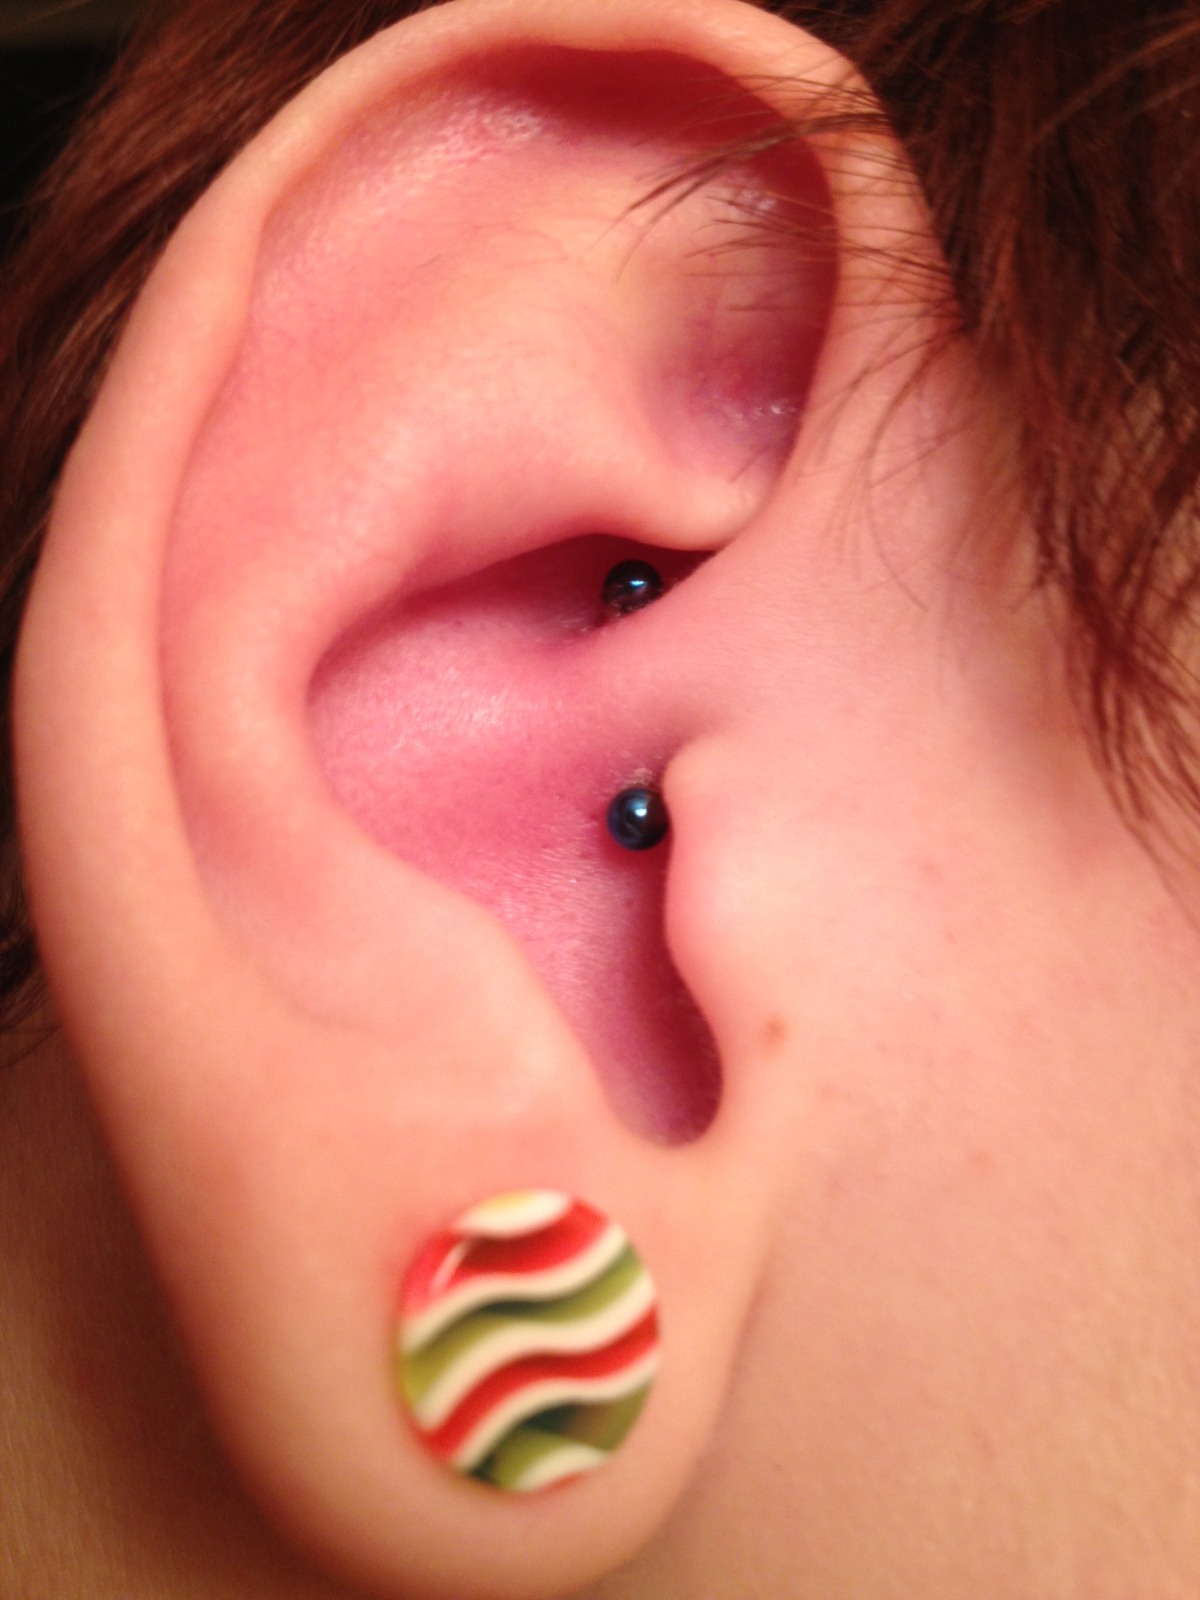 Right Ear Lobe Piercing And Daith Rook Piercing With black Barbell